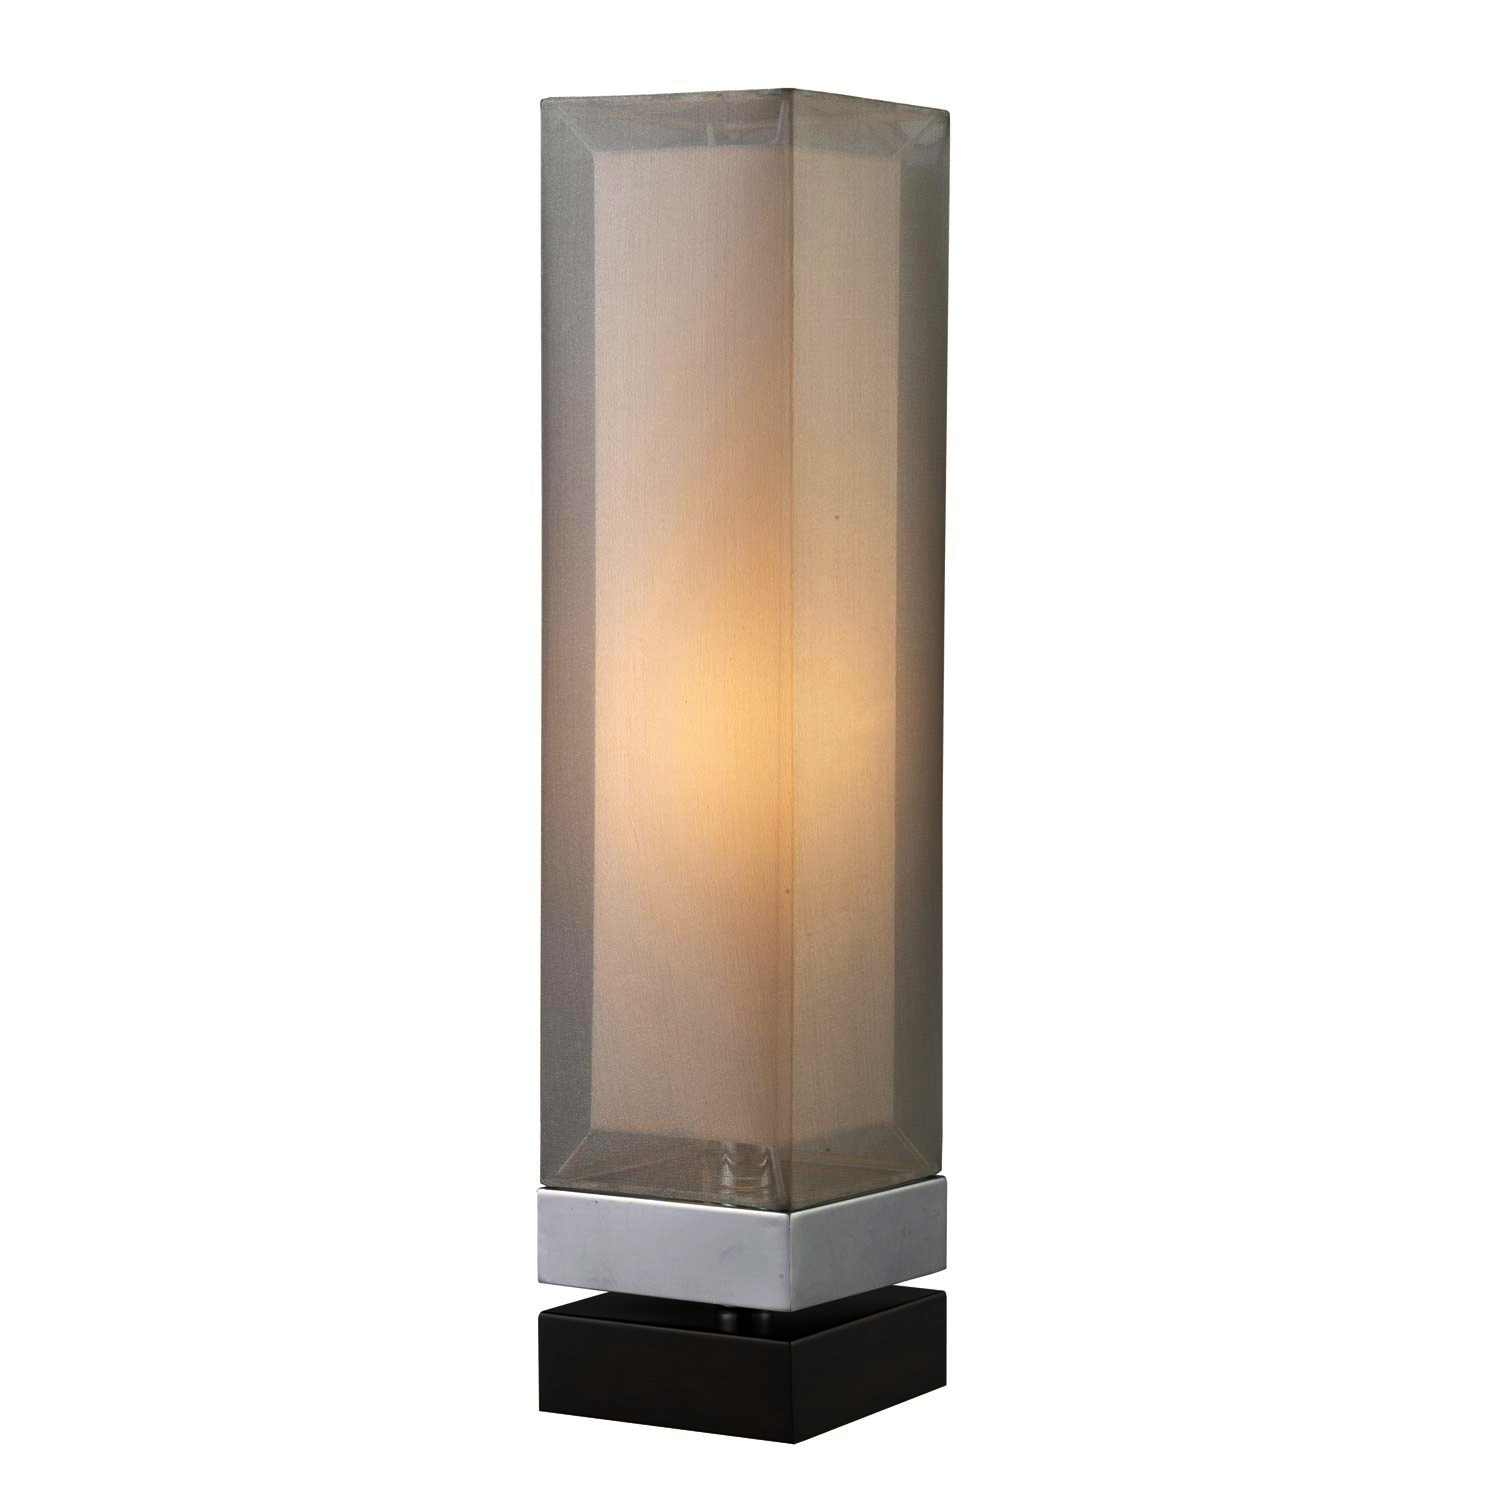 Elk Lighting D1409 Volant Table Lamp - Chrome and Espresso Painted Bass